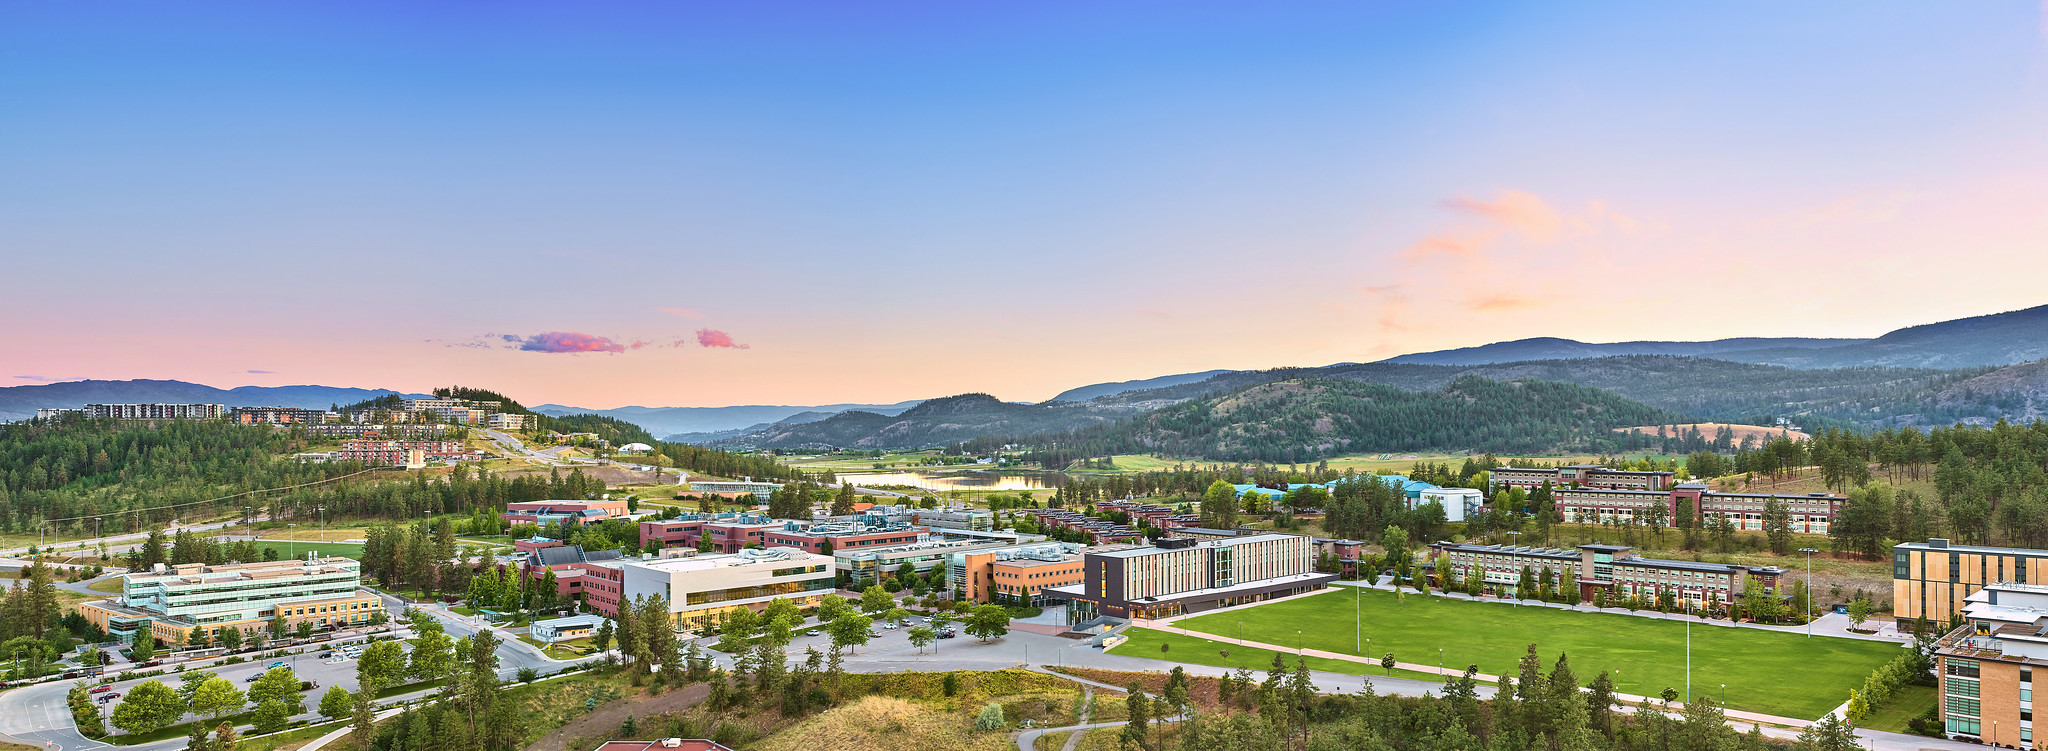 a view of the okanagan valley with UBCO kelowna university in the centre, surrounded by greenery, mountains and the lake in the background